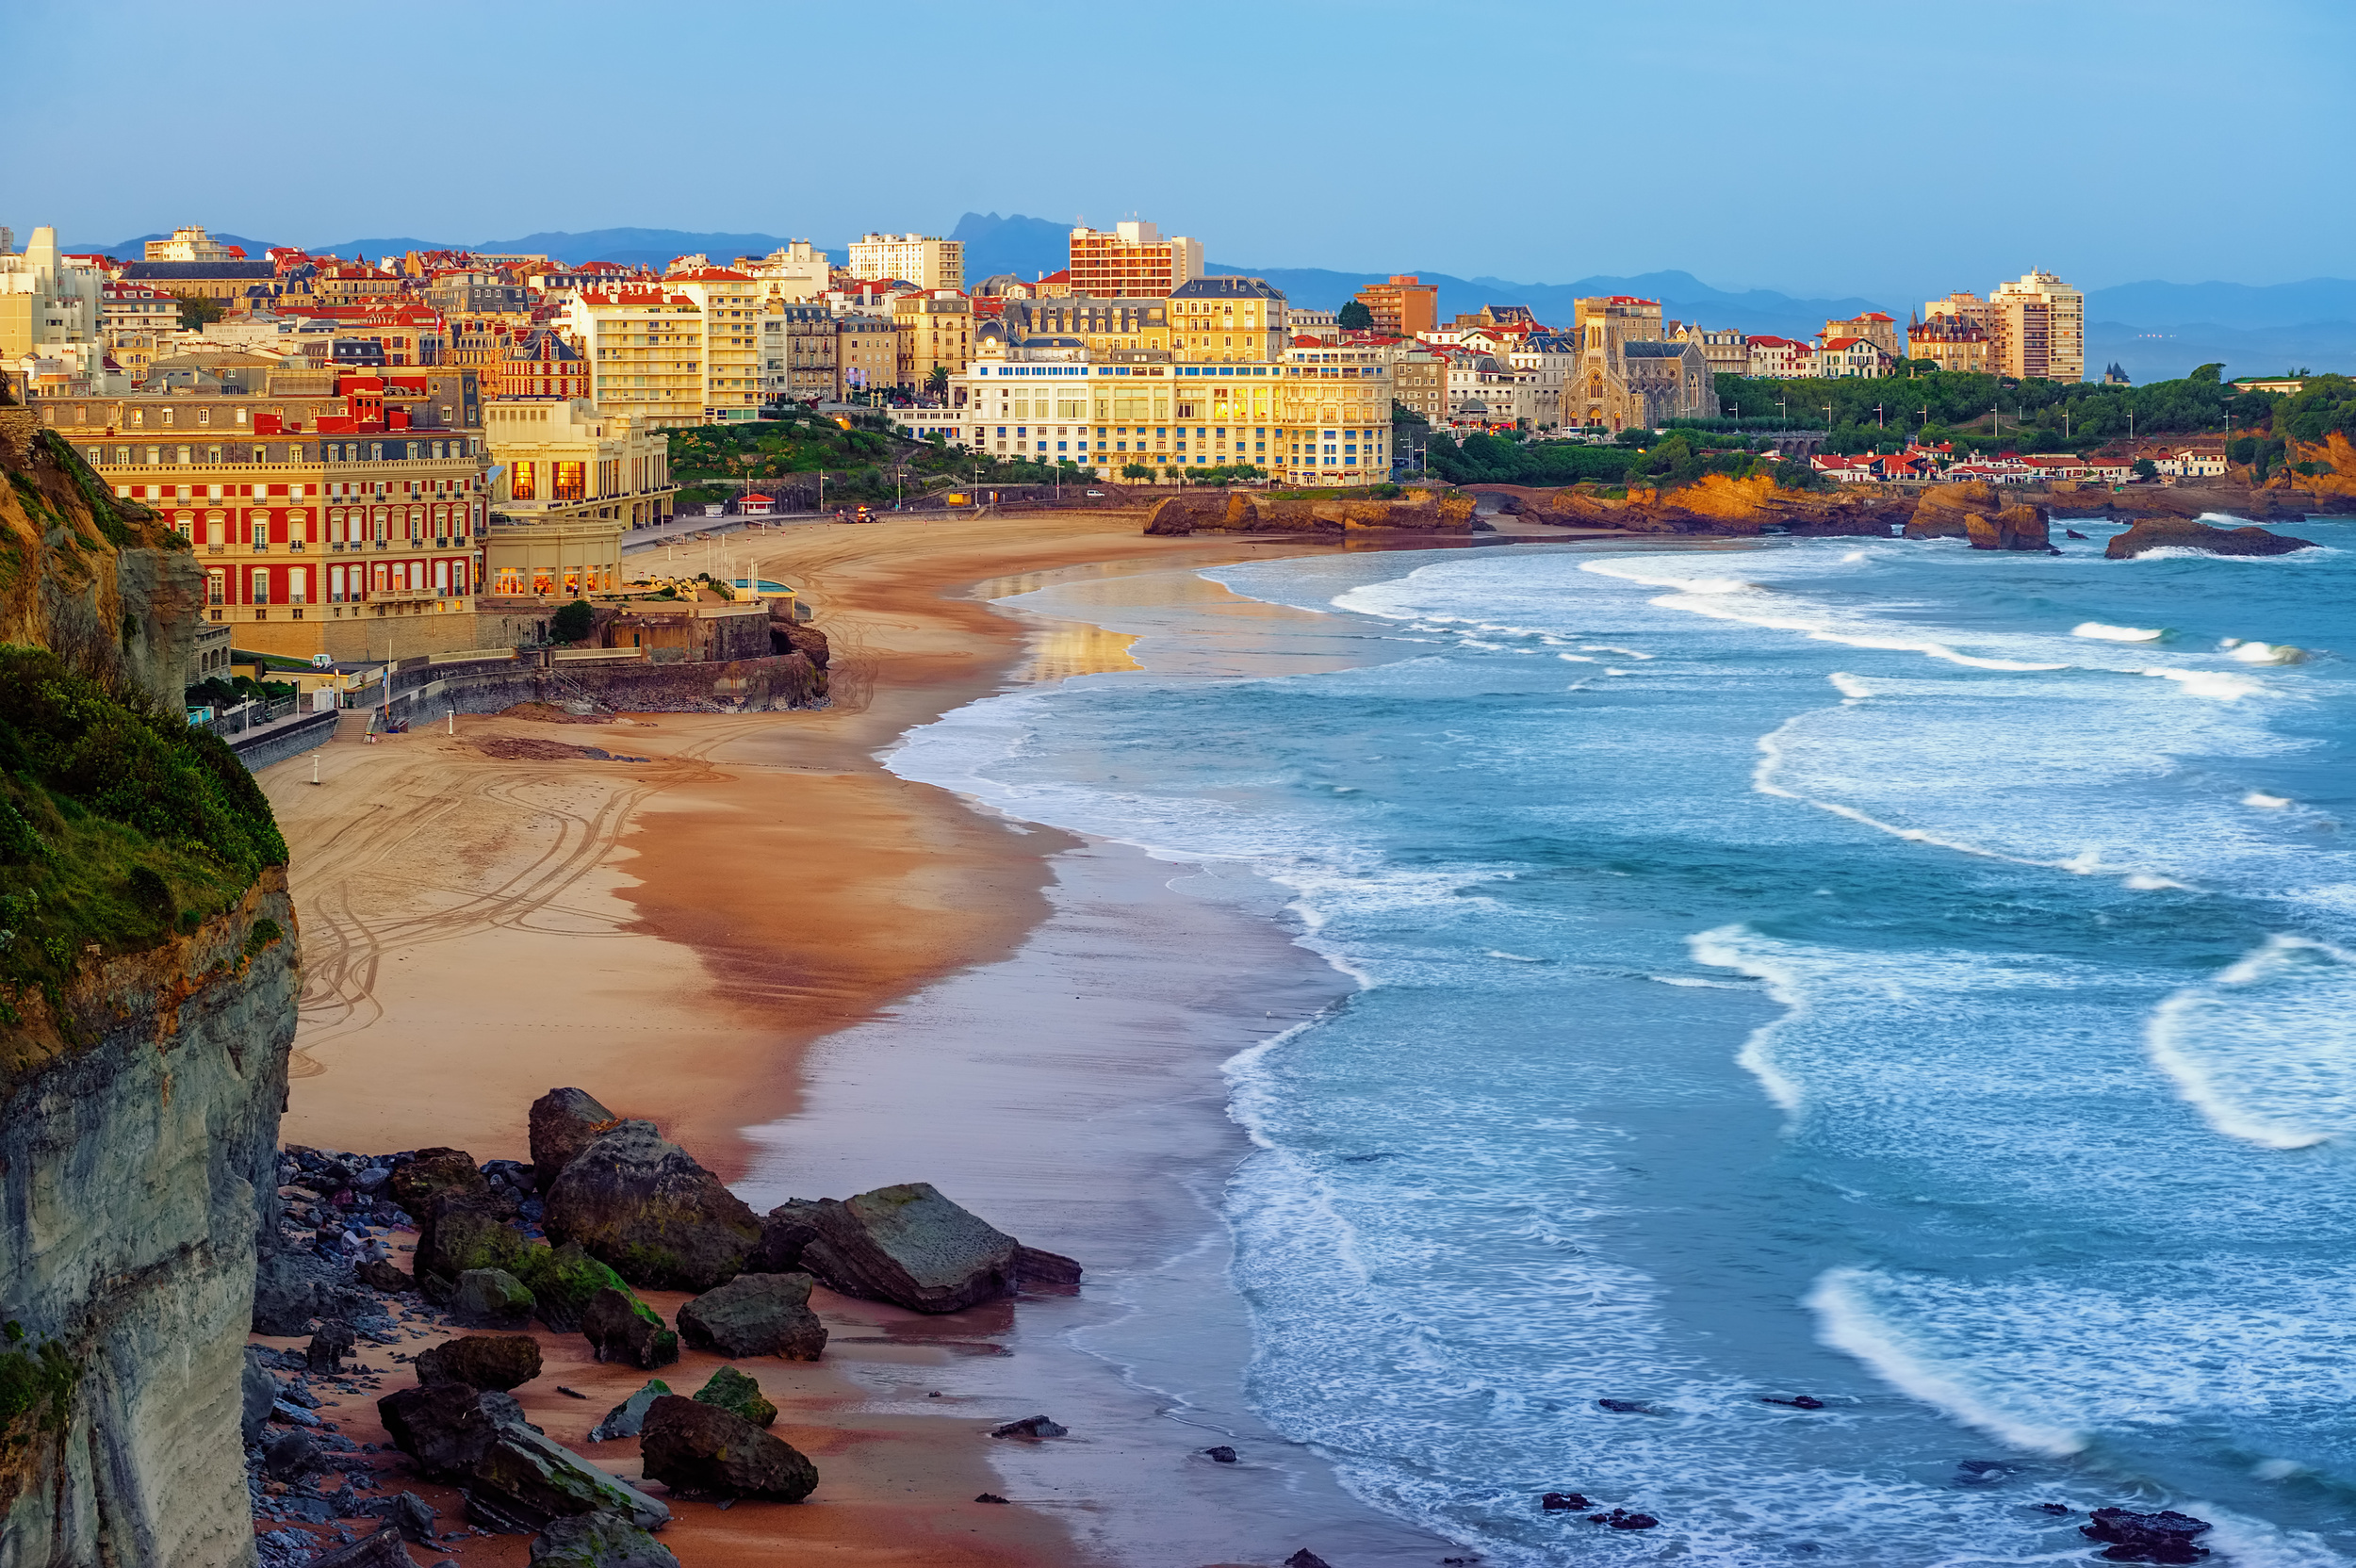 <p>Another gem in the southwest of France, Béziers is an up-and-coming destination popular with surfers. The waves here are some of the best in the country, particularly for beginners.</p><p>You may also like: <a href='https://www.yardbarker.com/lifestyle/articles/20_ways_to_add_more_cardio_to_your_life/s1__40061582'>20 ways to add more cardio to your life</a></p>